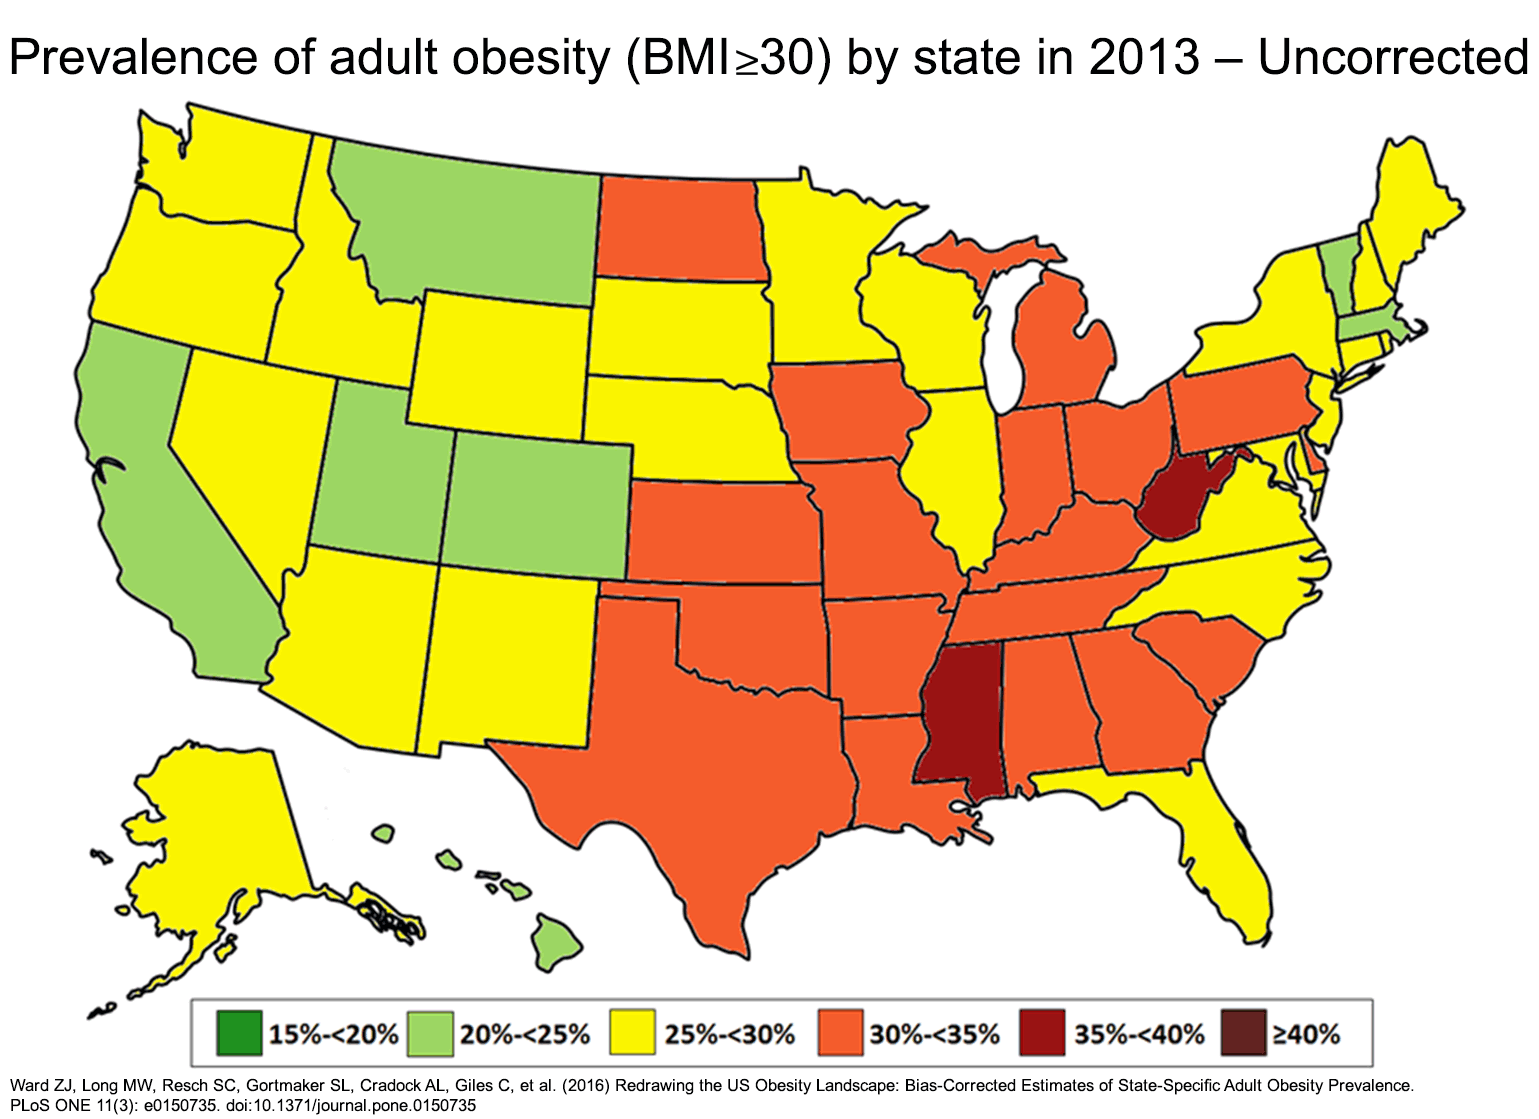 Animated maps showing rates of adult obesity becoming progressively higher throughout all states in the United States